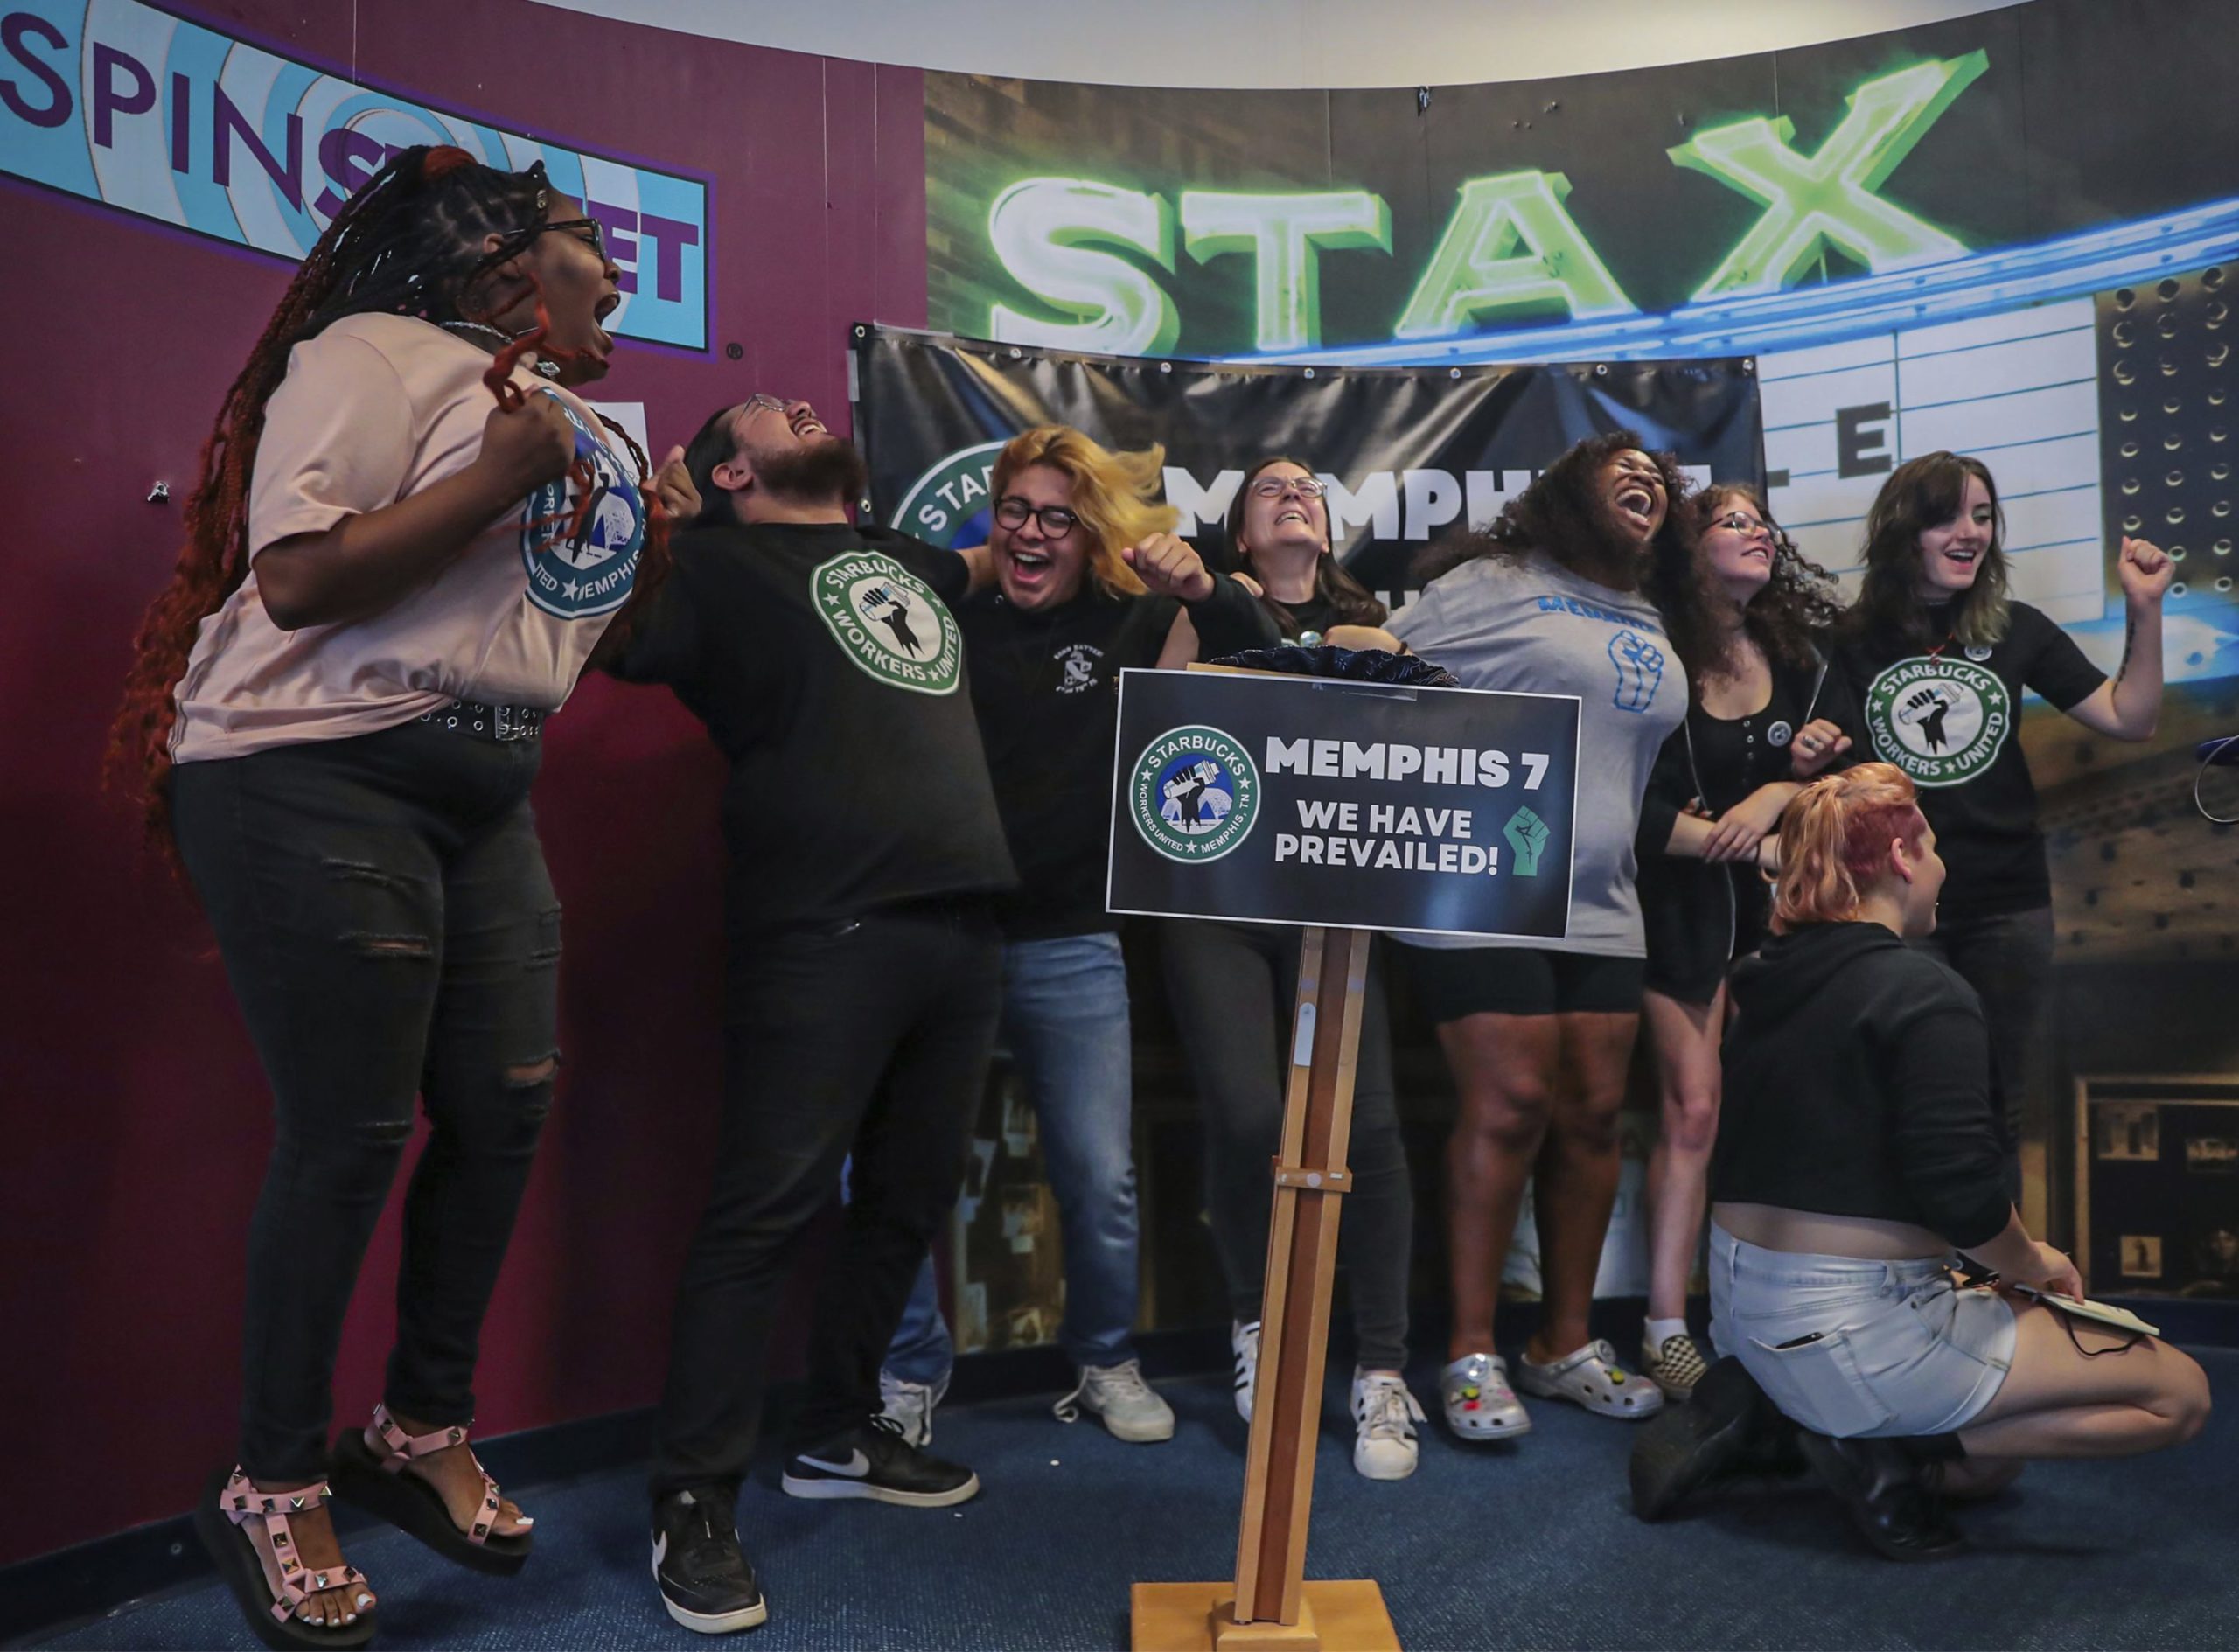 7 Starbucks workers who pushed to organize even after getting fired in February celebrate union vote in Memphis